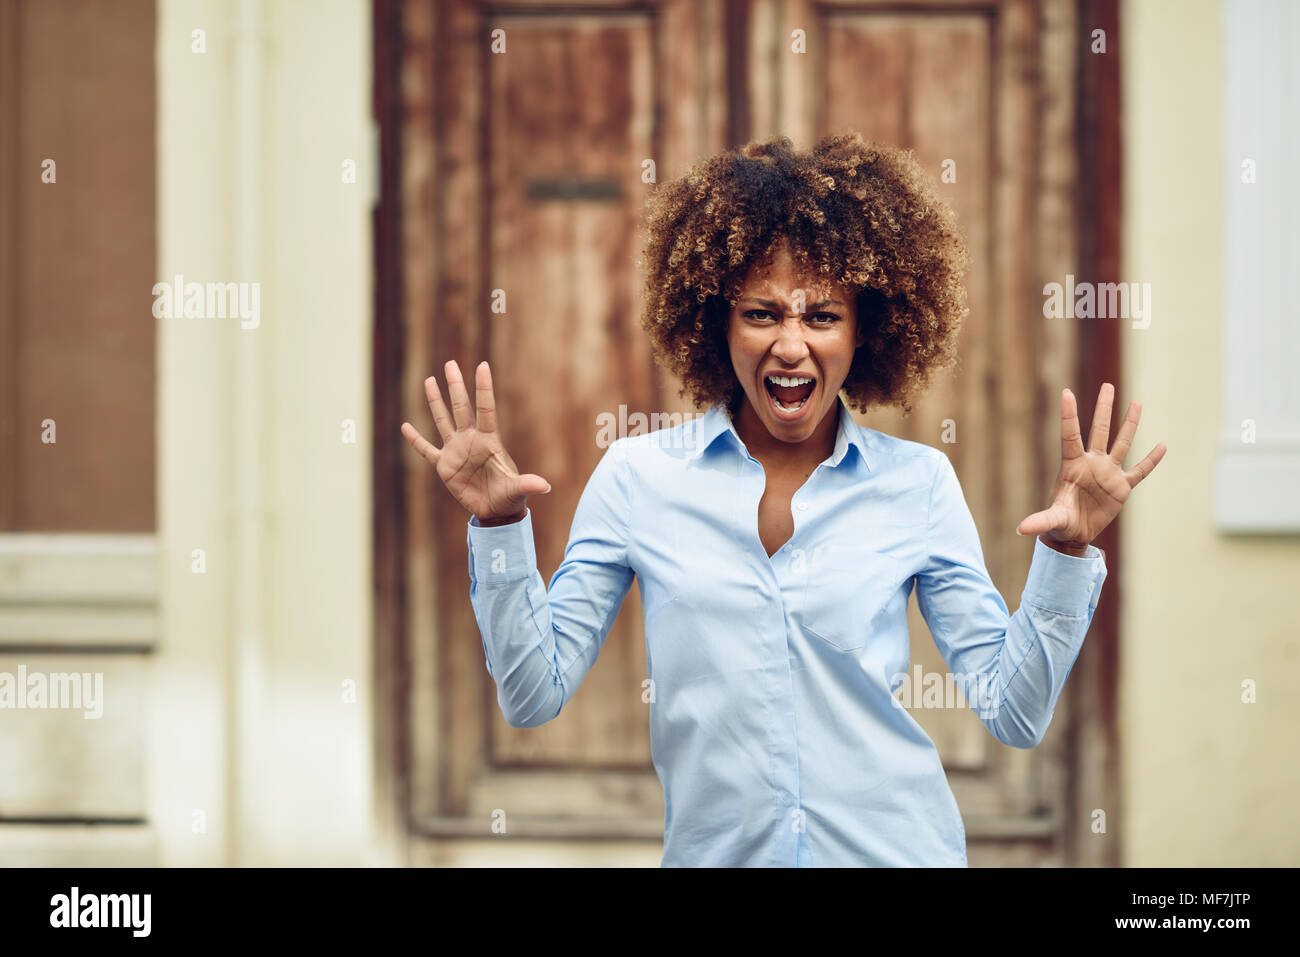 Spain, Andalusia, Malaga. Young black woman, afro hairstyle, screaming in the street. Girl wearing casual clothes in urban background. Expression conc Stock Photo